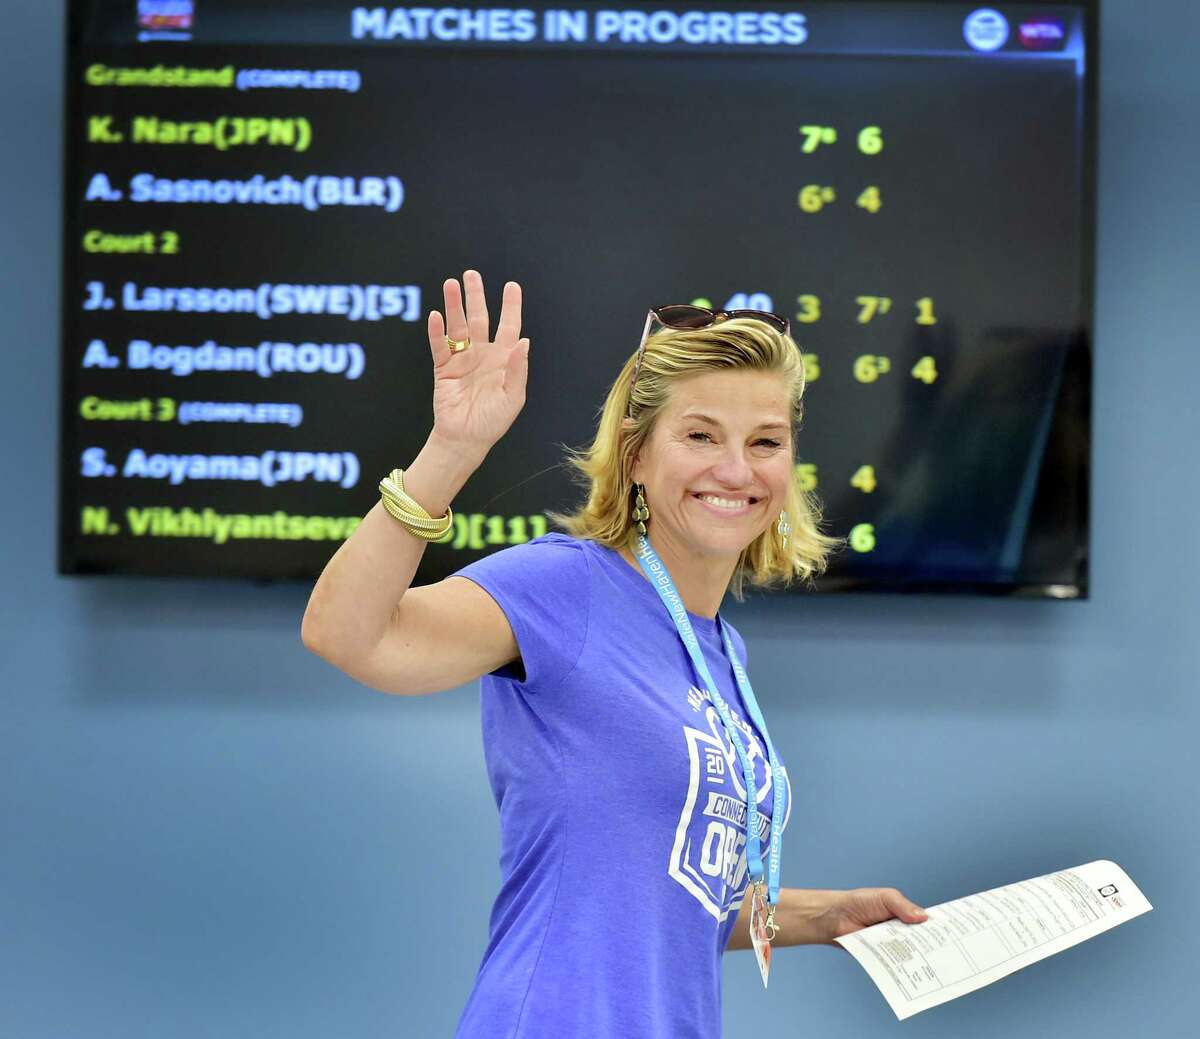 (Peter Hvizdak / Hearst Connecticut Media) New Haven,Connecticut: Saturday, August 19, 2017. Connecticut Open tournament director Anne Worcester waves to a photographer Saturday afternoon in the Media Center at the Connecticut Open tennis tournament.